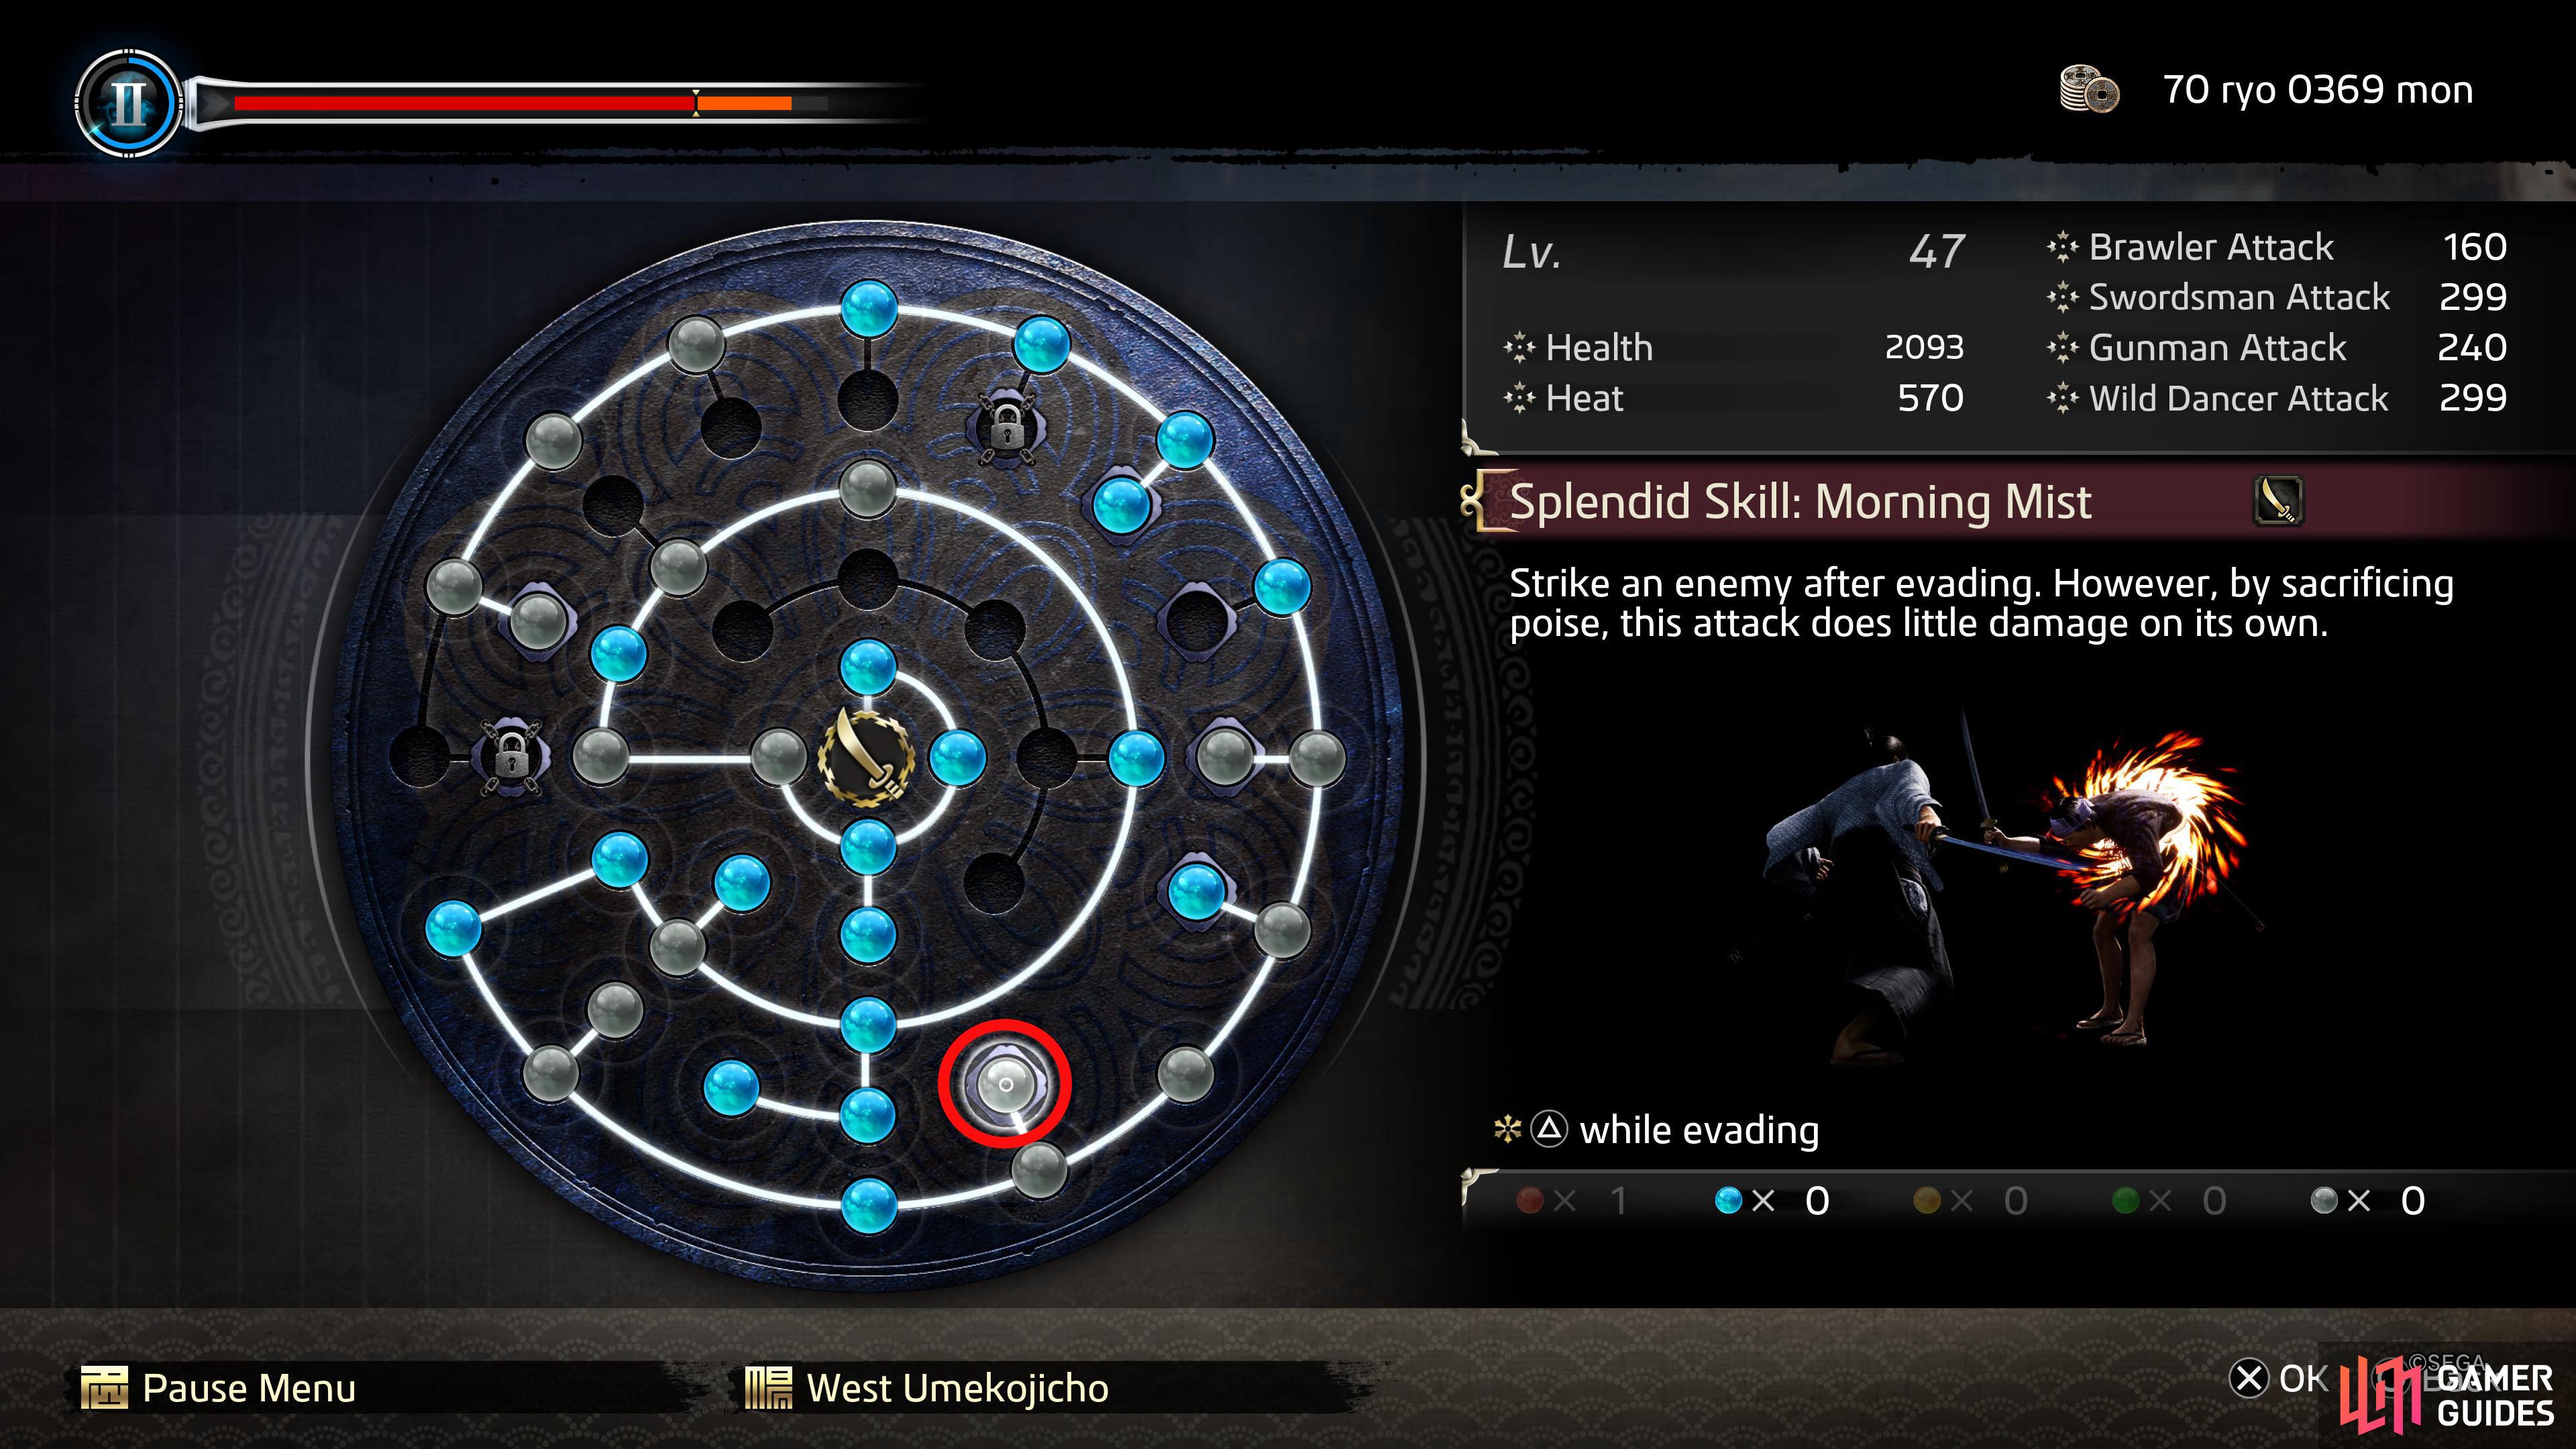 Here is where you'll find Morning Mist on the Ability Wheel.